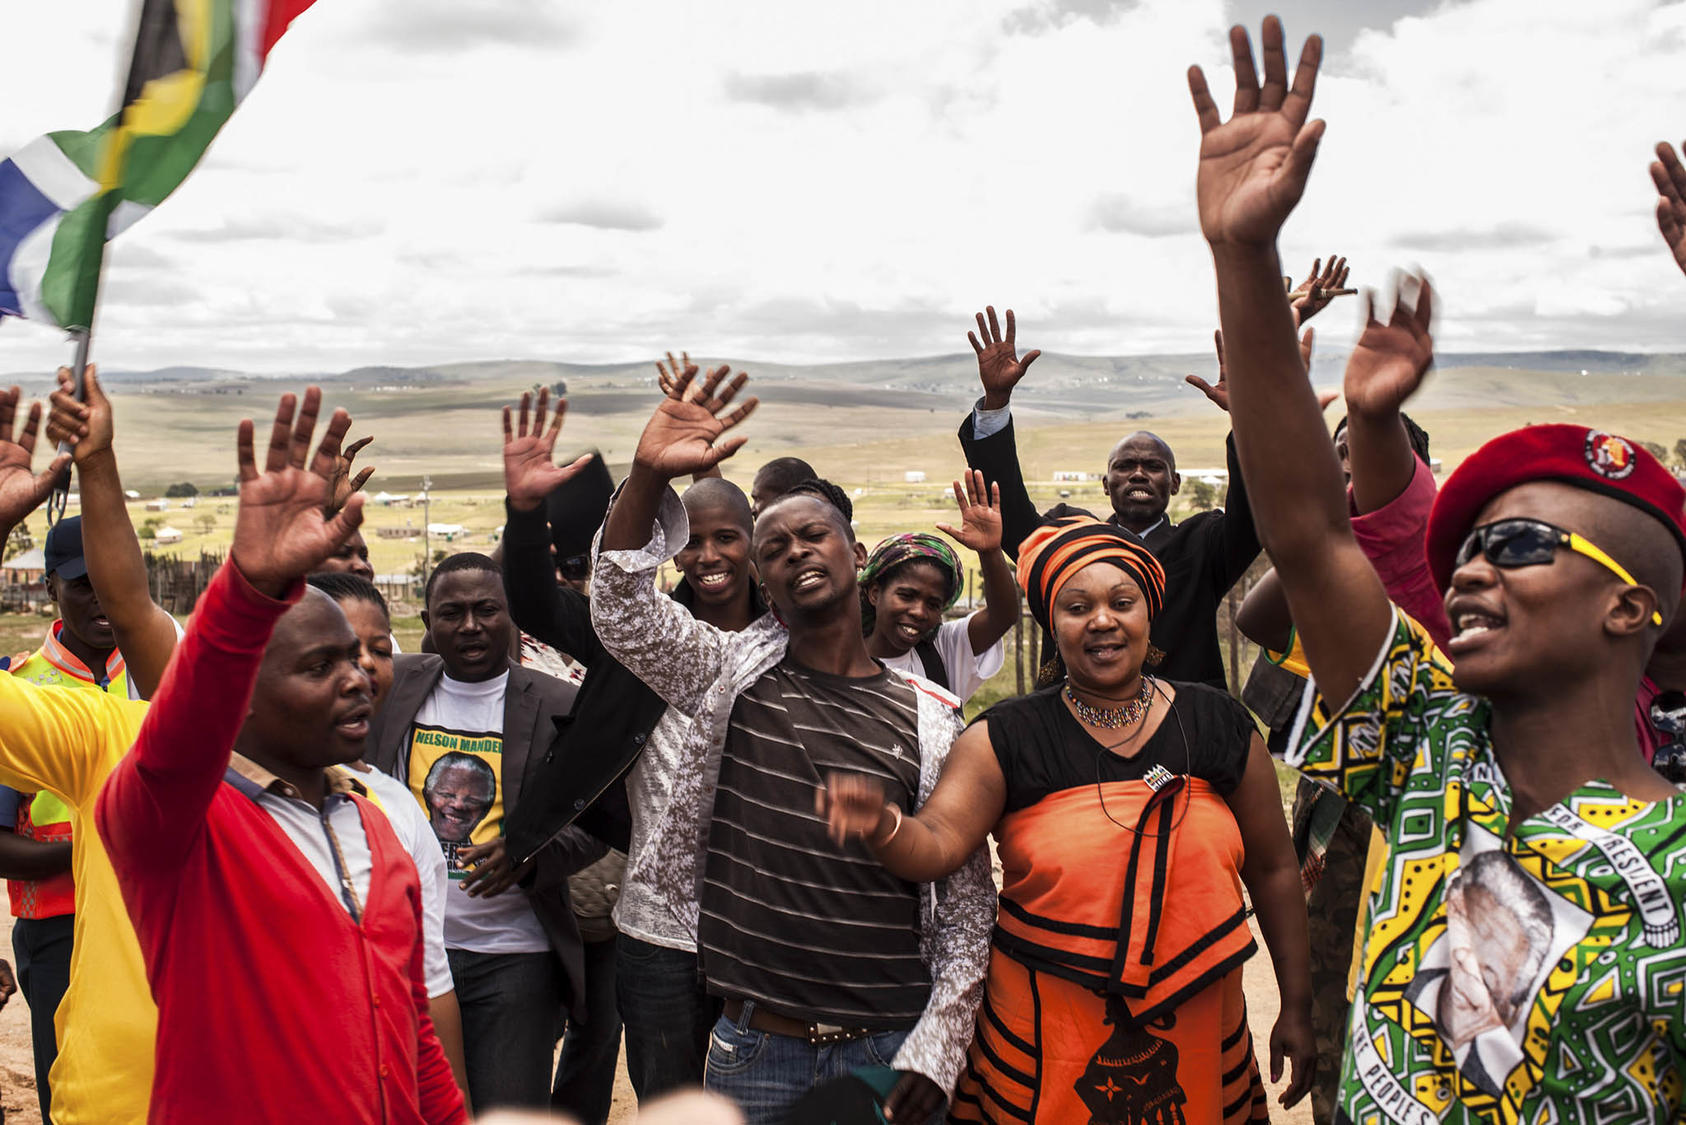 South Africans sing songs from their anti-apartheid struggle after the funeral of Nelson Mandela 10 years ago. The legacies of Mandela and the struggle he helped lead still resonate for nonviolent movements in the 2020s. (Bryan Denton/The New York Times)